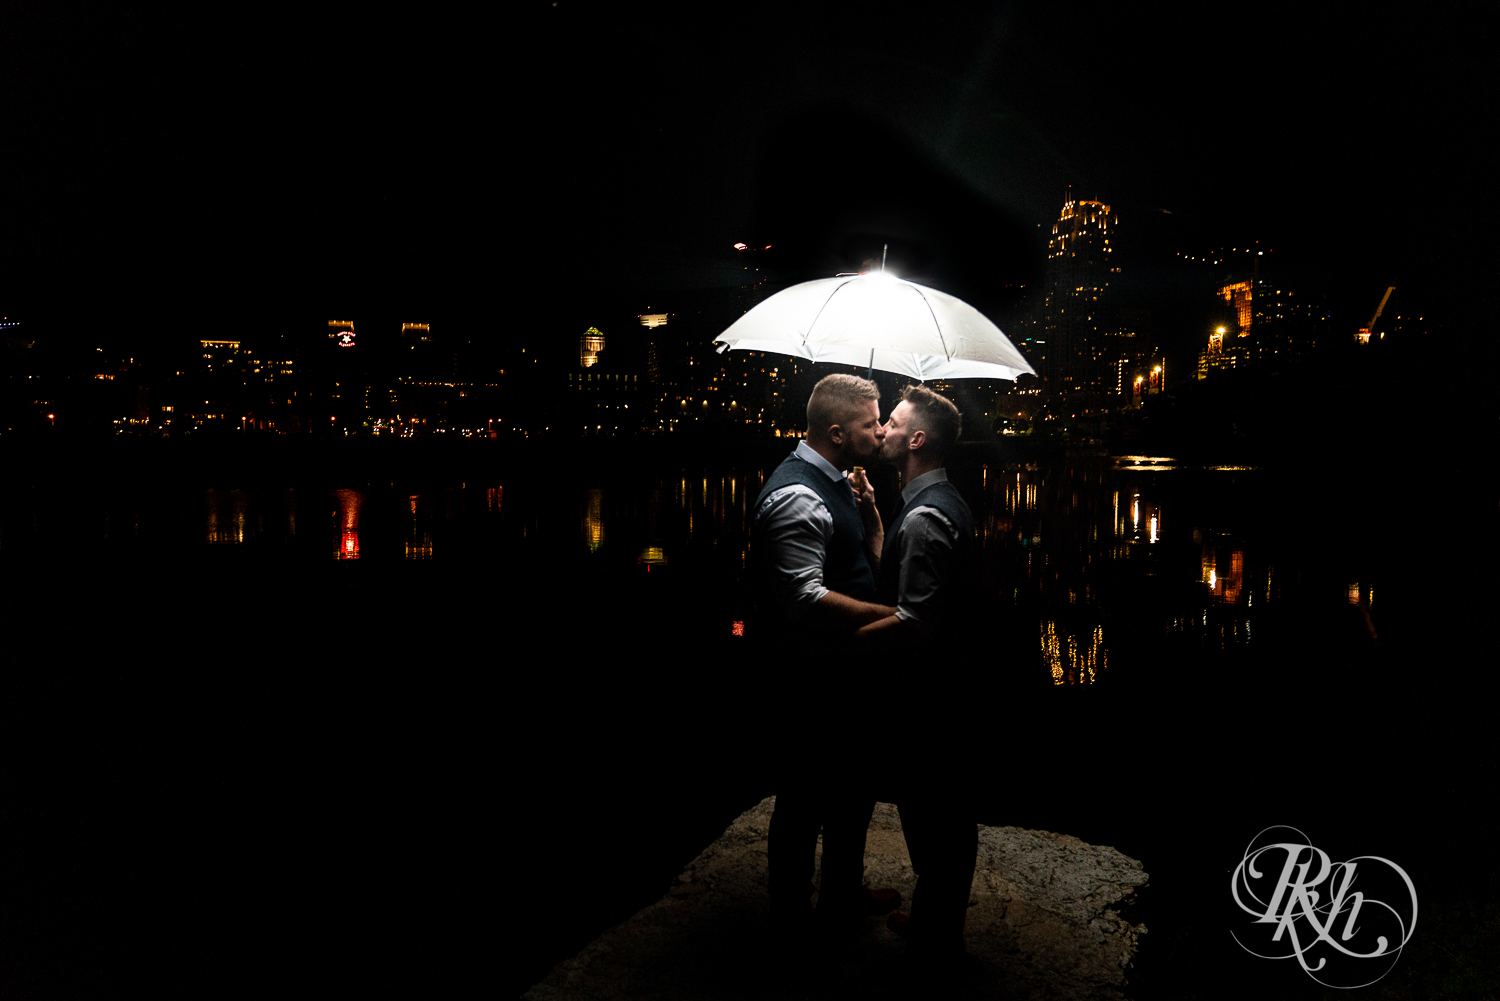 Gay grooms kiss under umbrella at night in Minneapolis, Minnesota with skyline in the background.